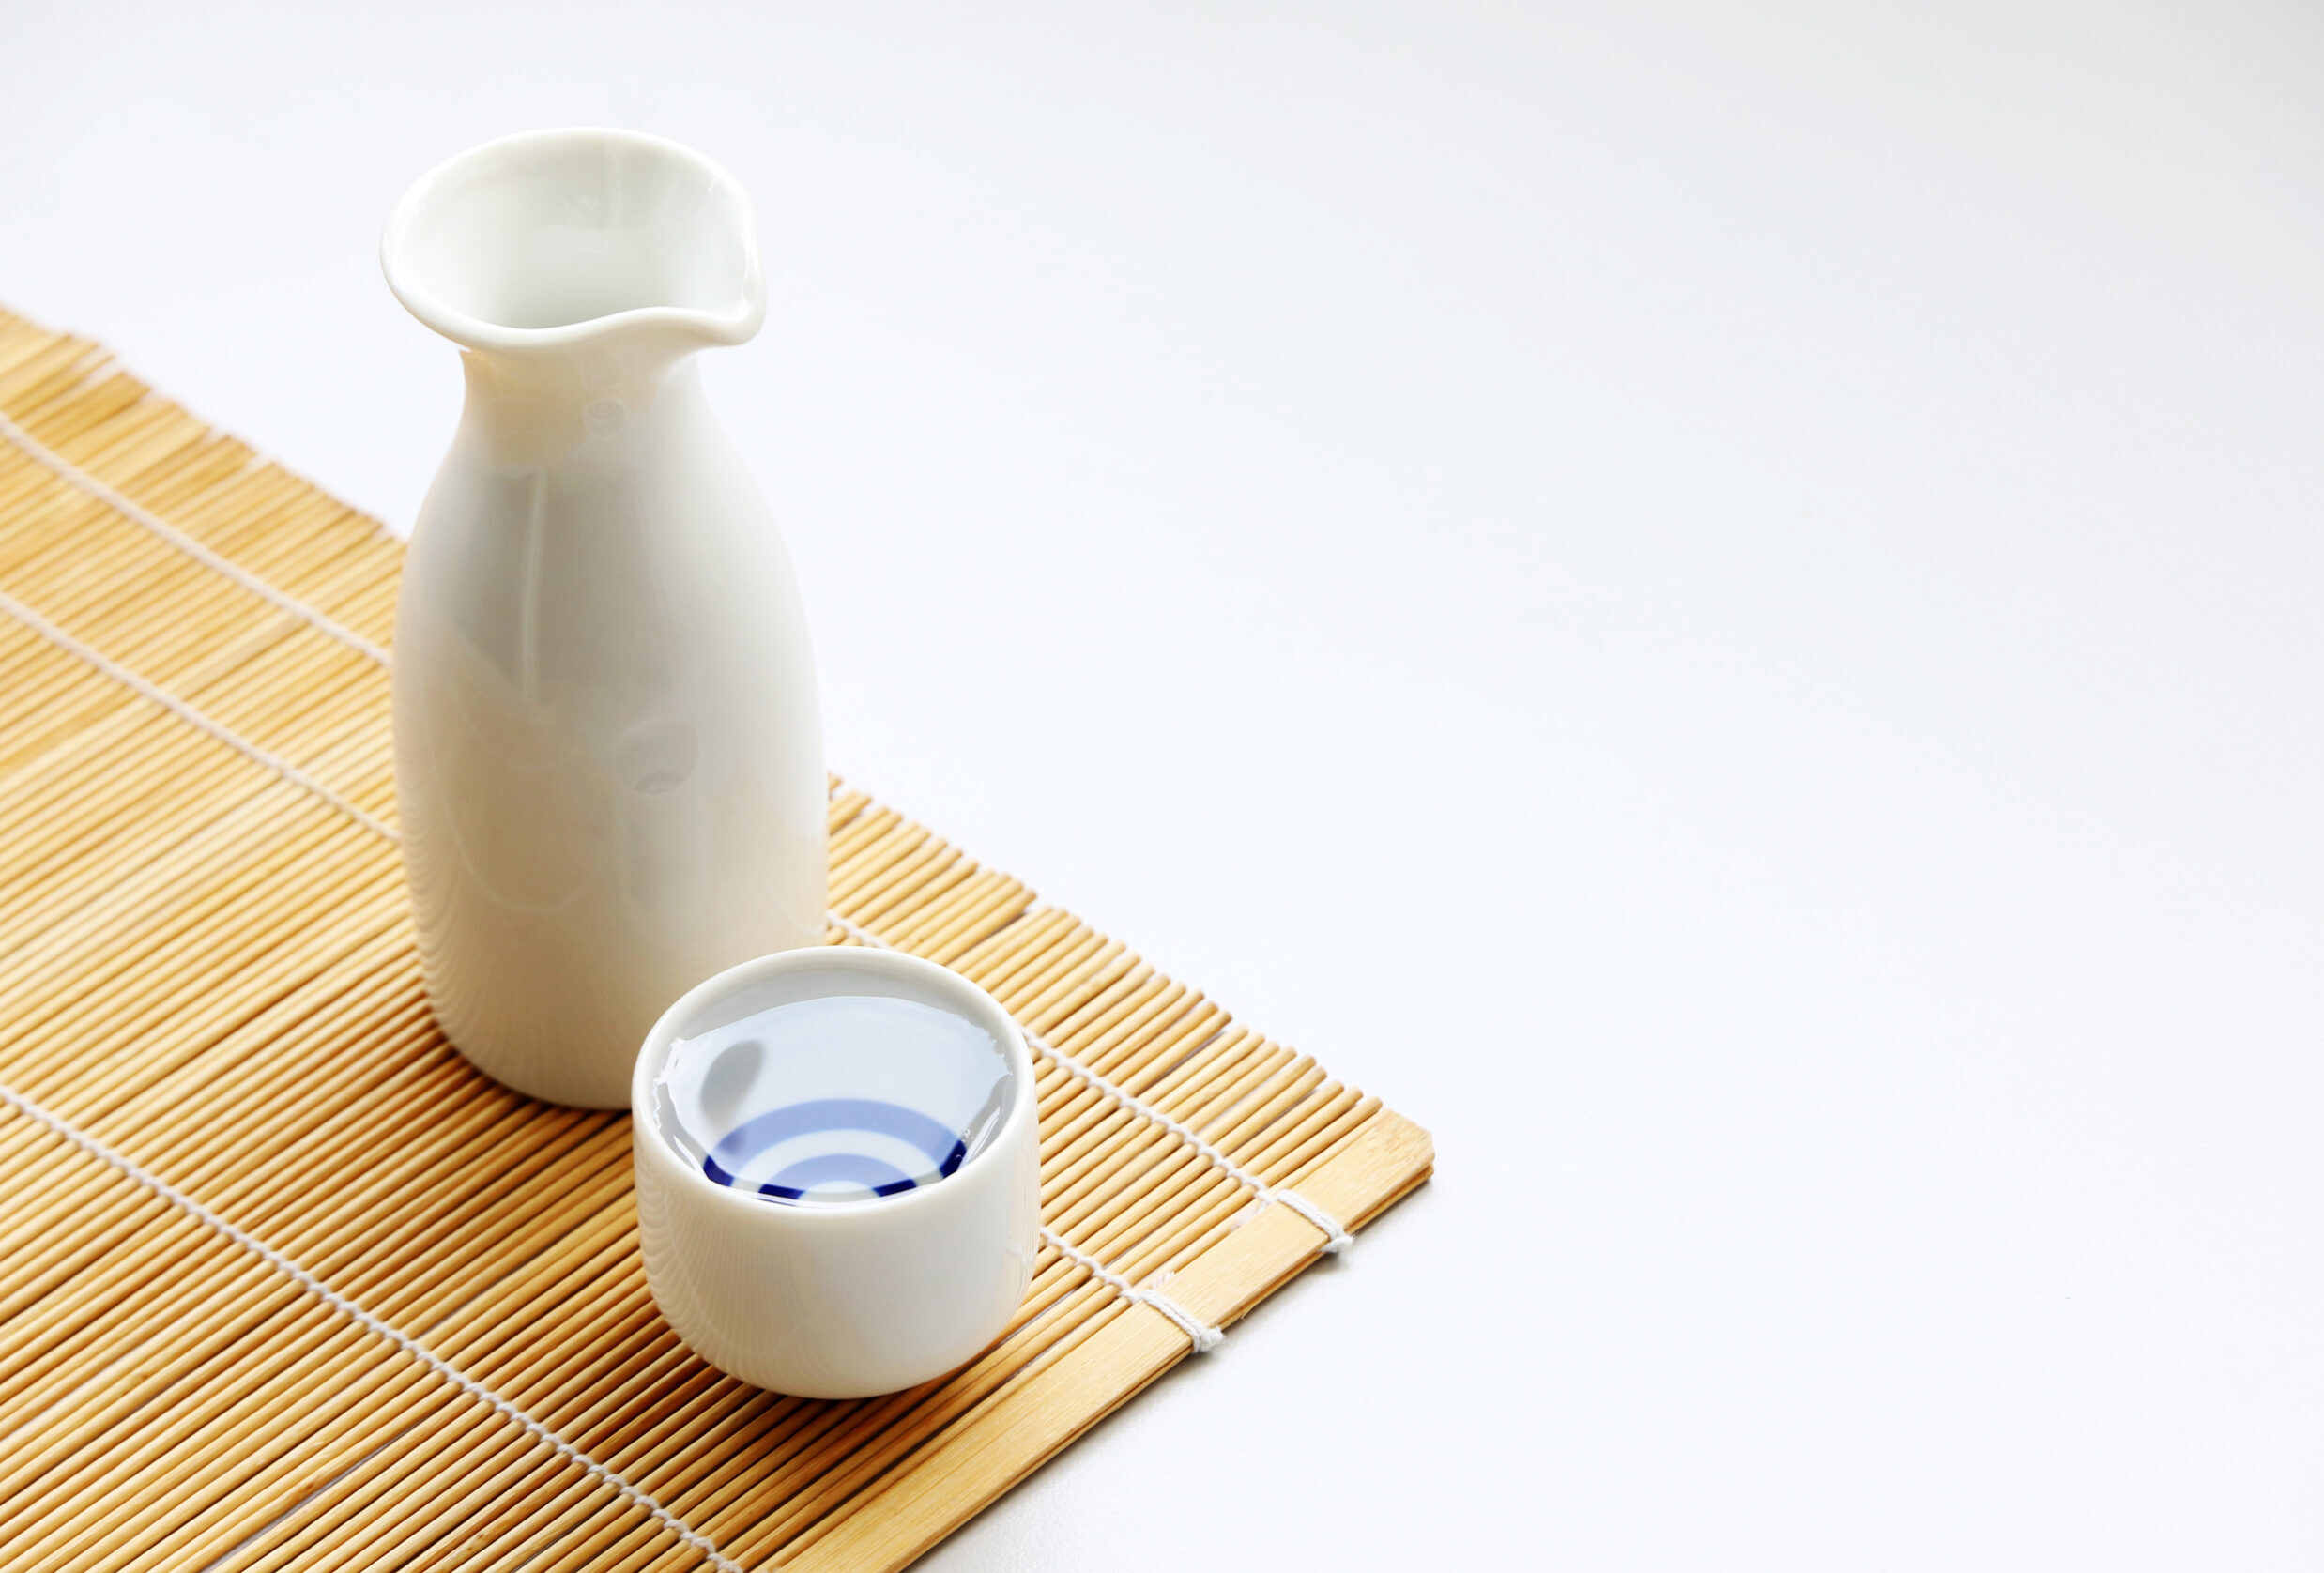 Sake in a traditional serving glass and bottle on a bamboo mat.